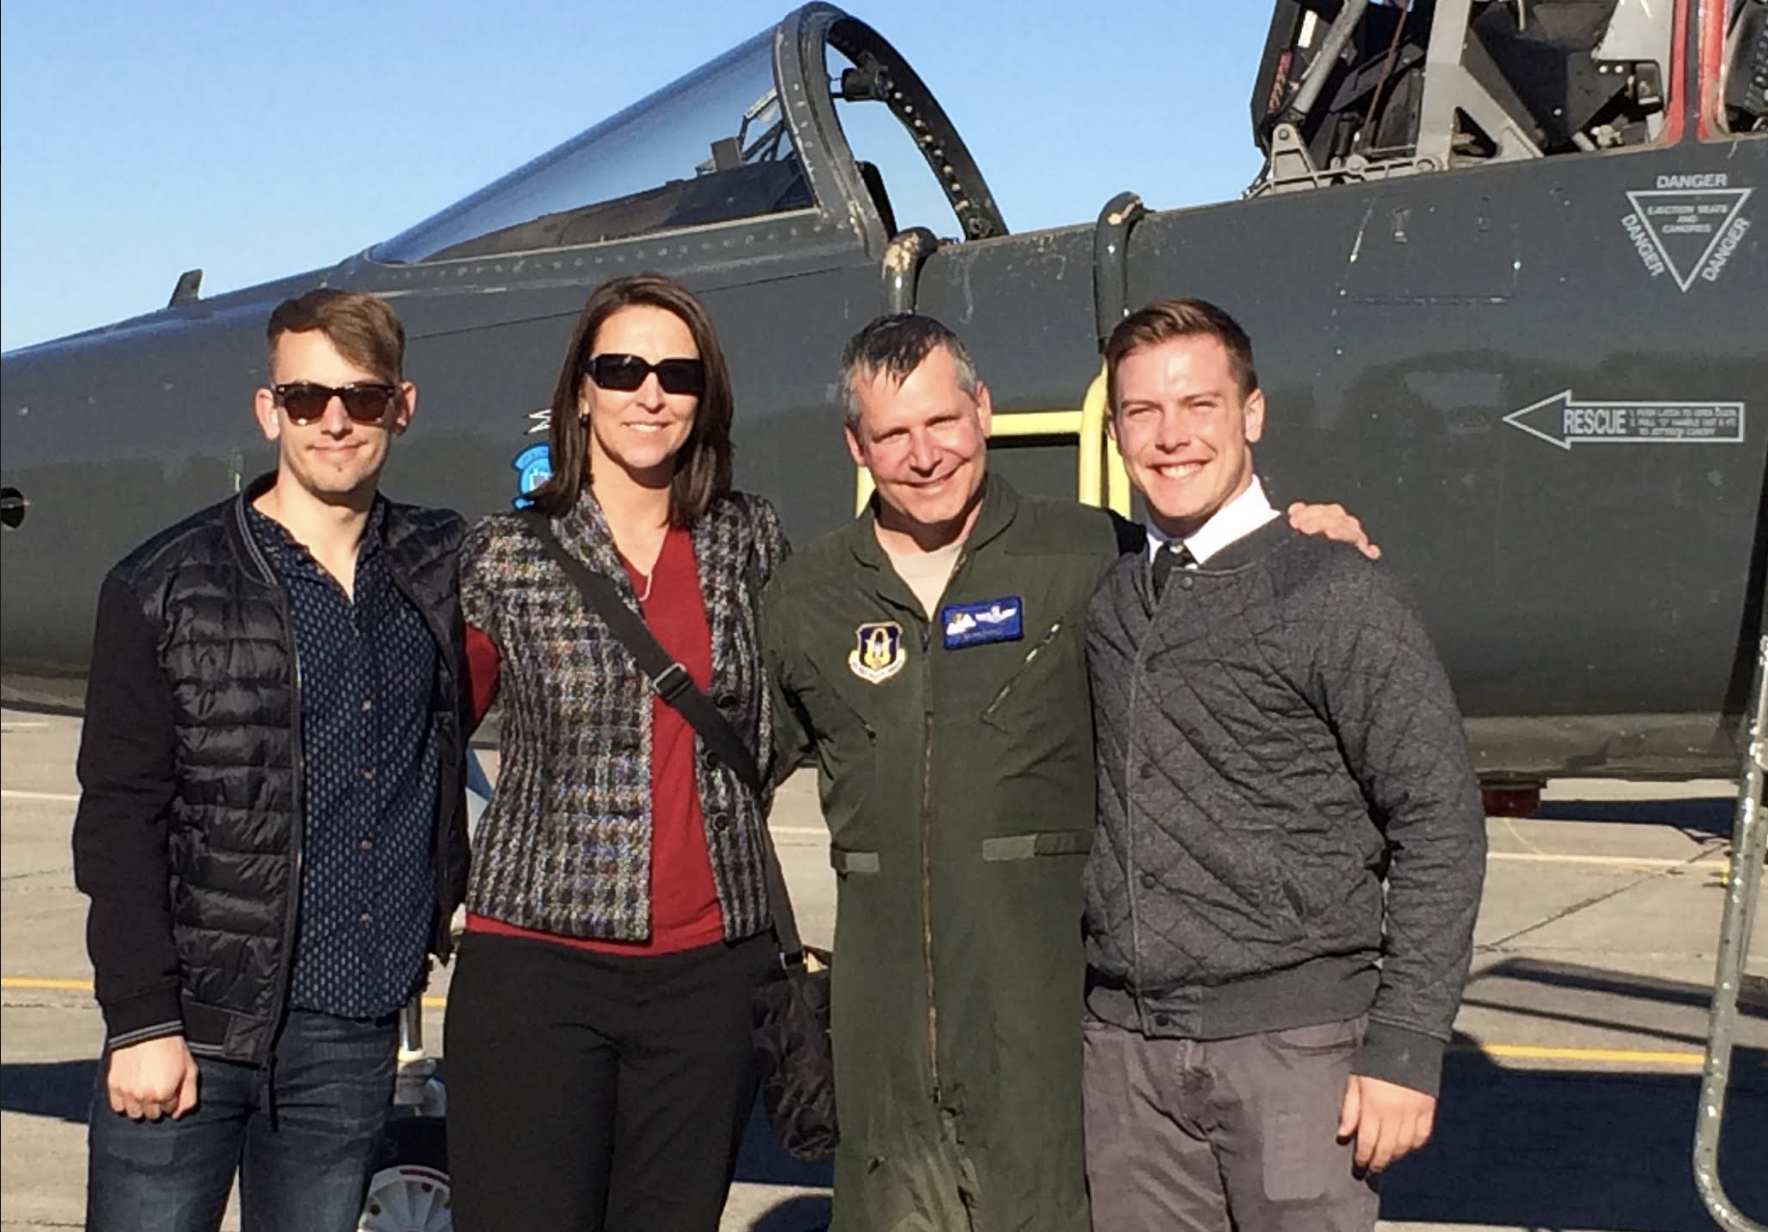 MyVetBENEFITS founder, Todd Ernst, with his family following his fini flight with the Air Force. Photo: Todd Ernst.